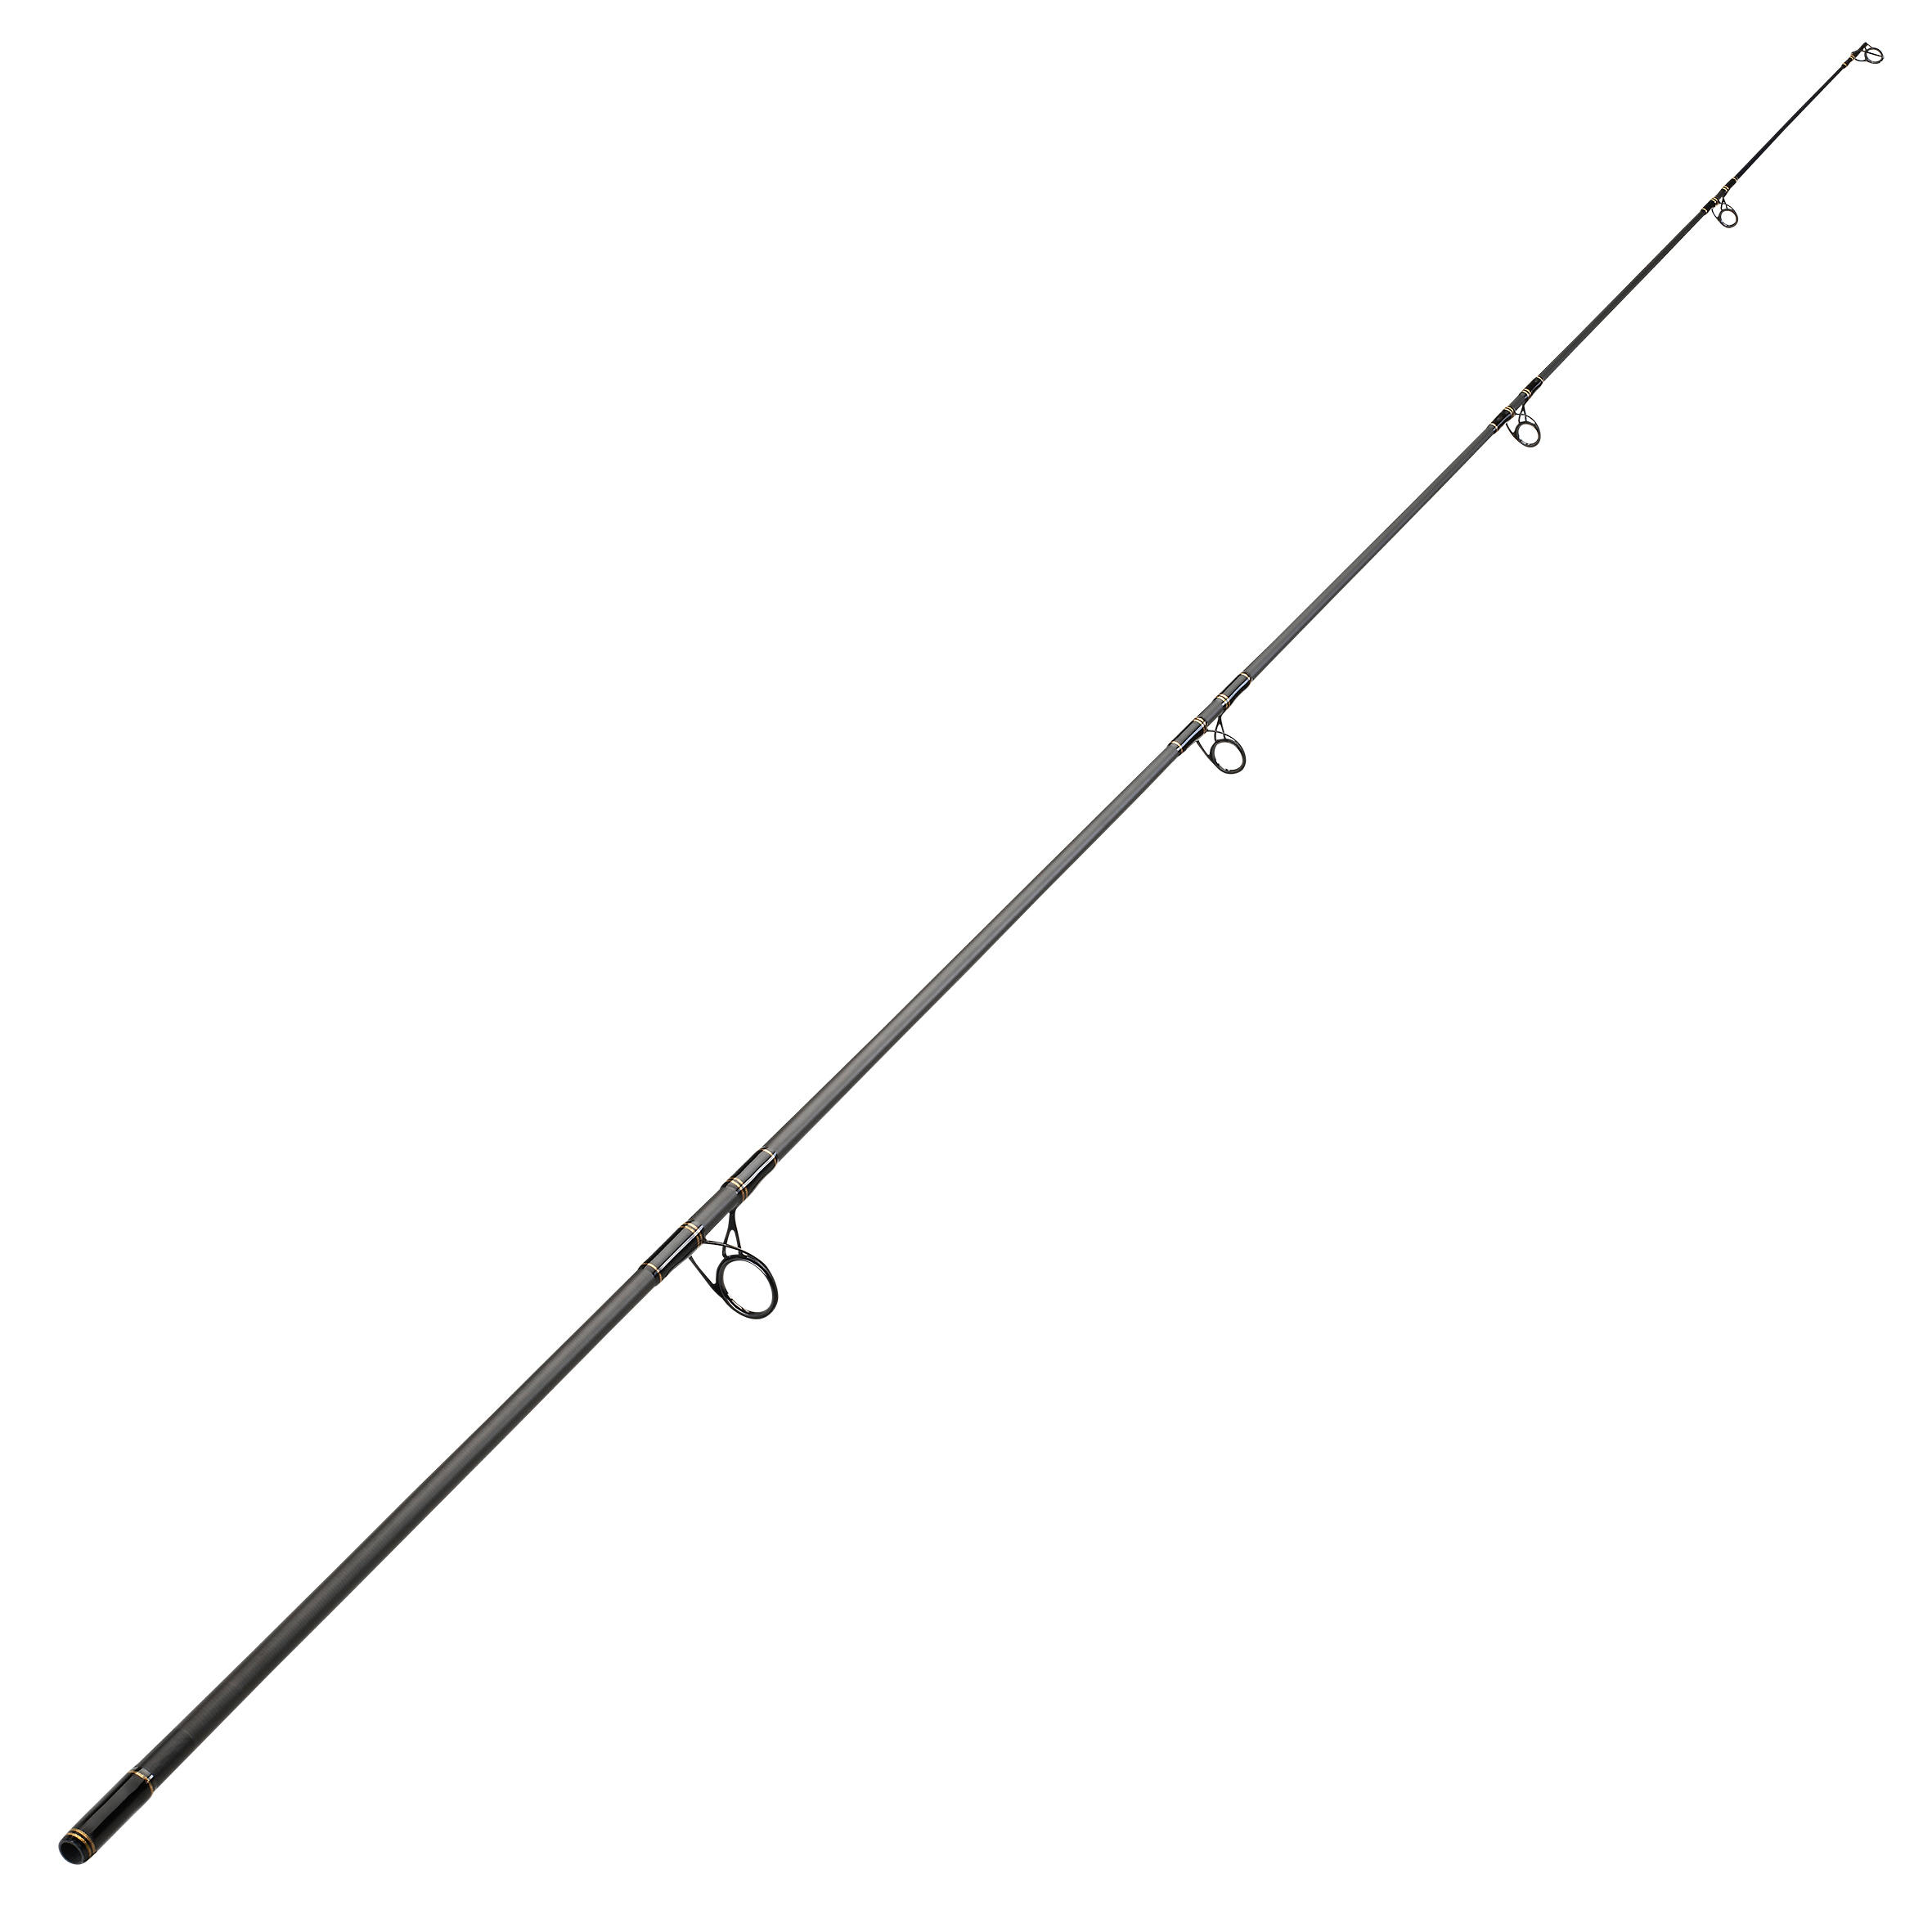 Replacement tip for the Xtrem 9 Slim 390 (13 feet) rod for carp fishing. 1/1